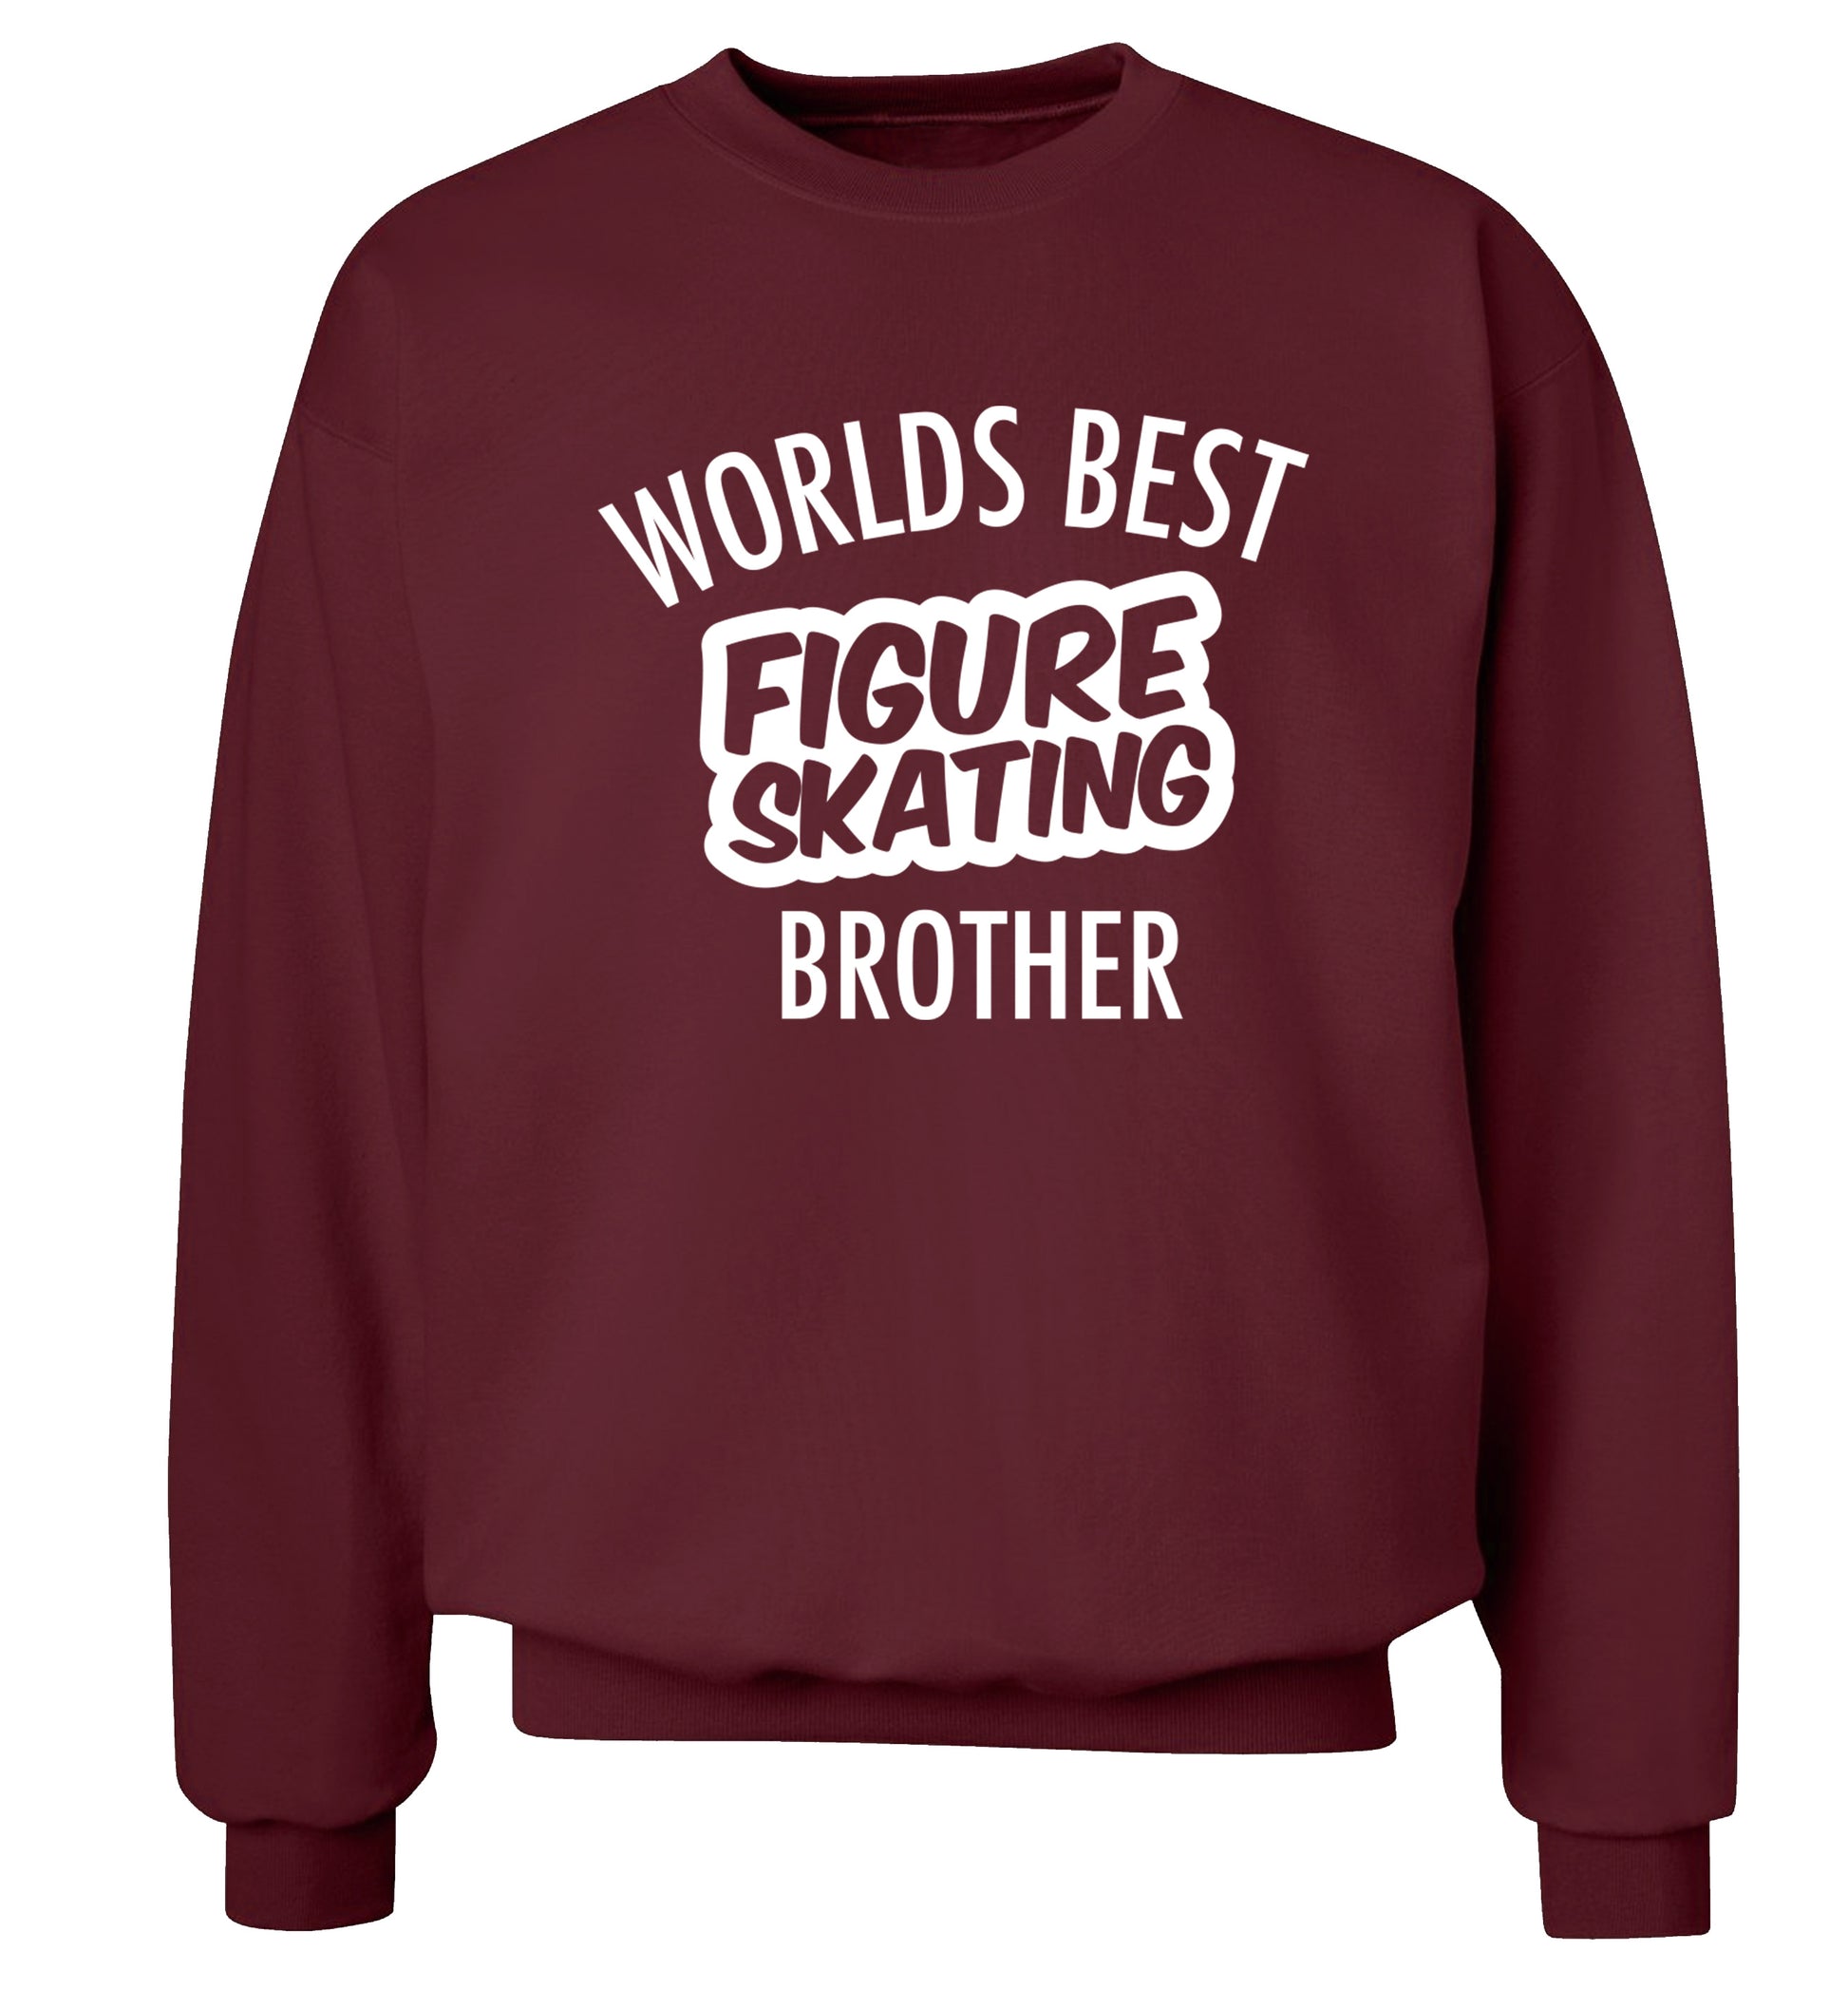 Worlds best figure skating brother Adult's unisexmaroon Sweater 2XL